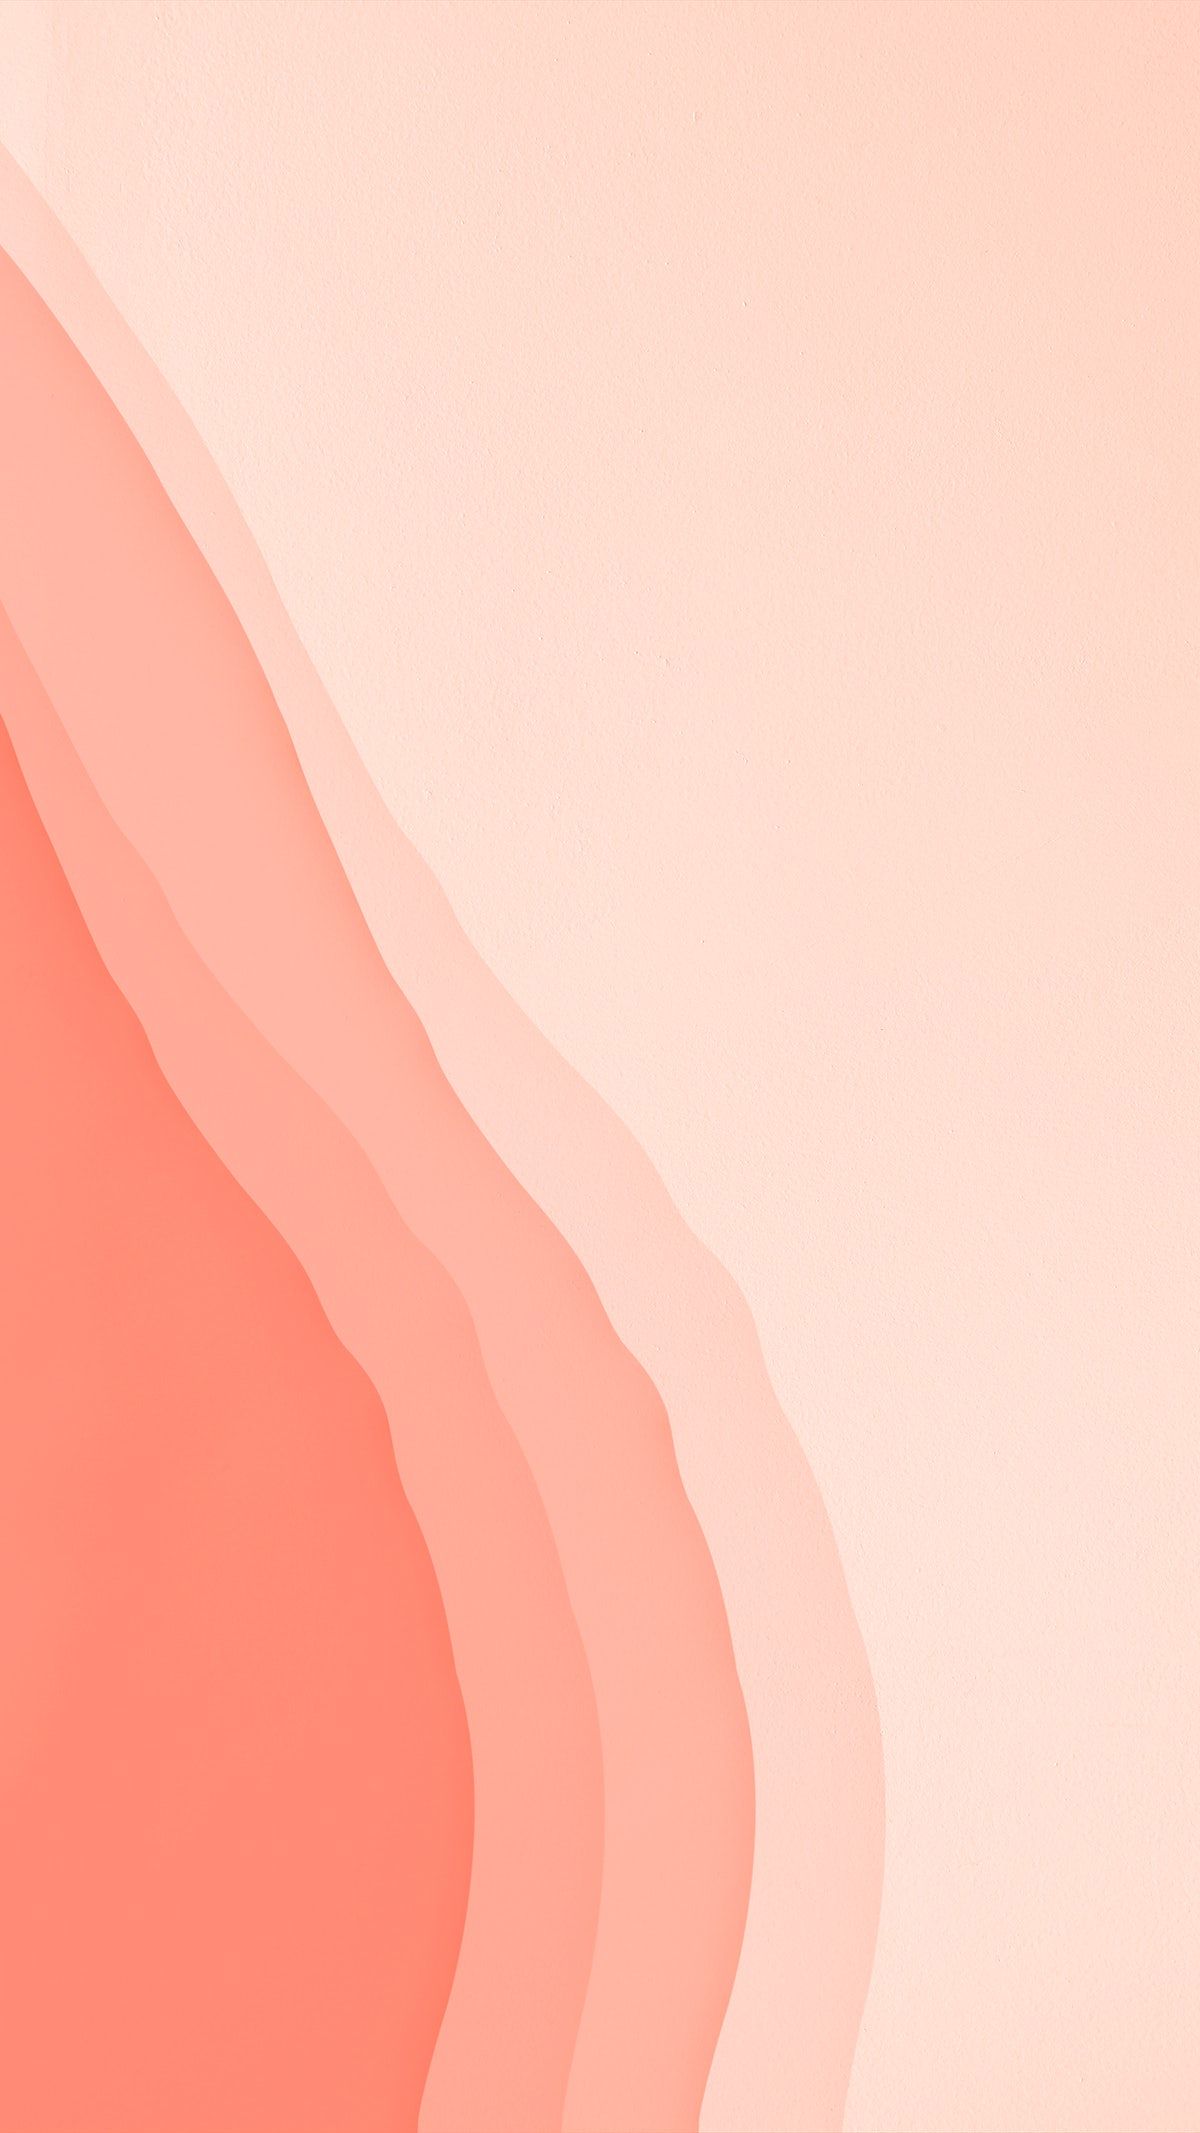 Download premium image of Abstract coral orange color psd background by Adj about abstract memphis. Simple iphone wallpaper, Peach wallpaper, Minimalist wallpaper